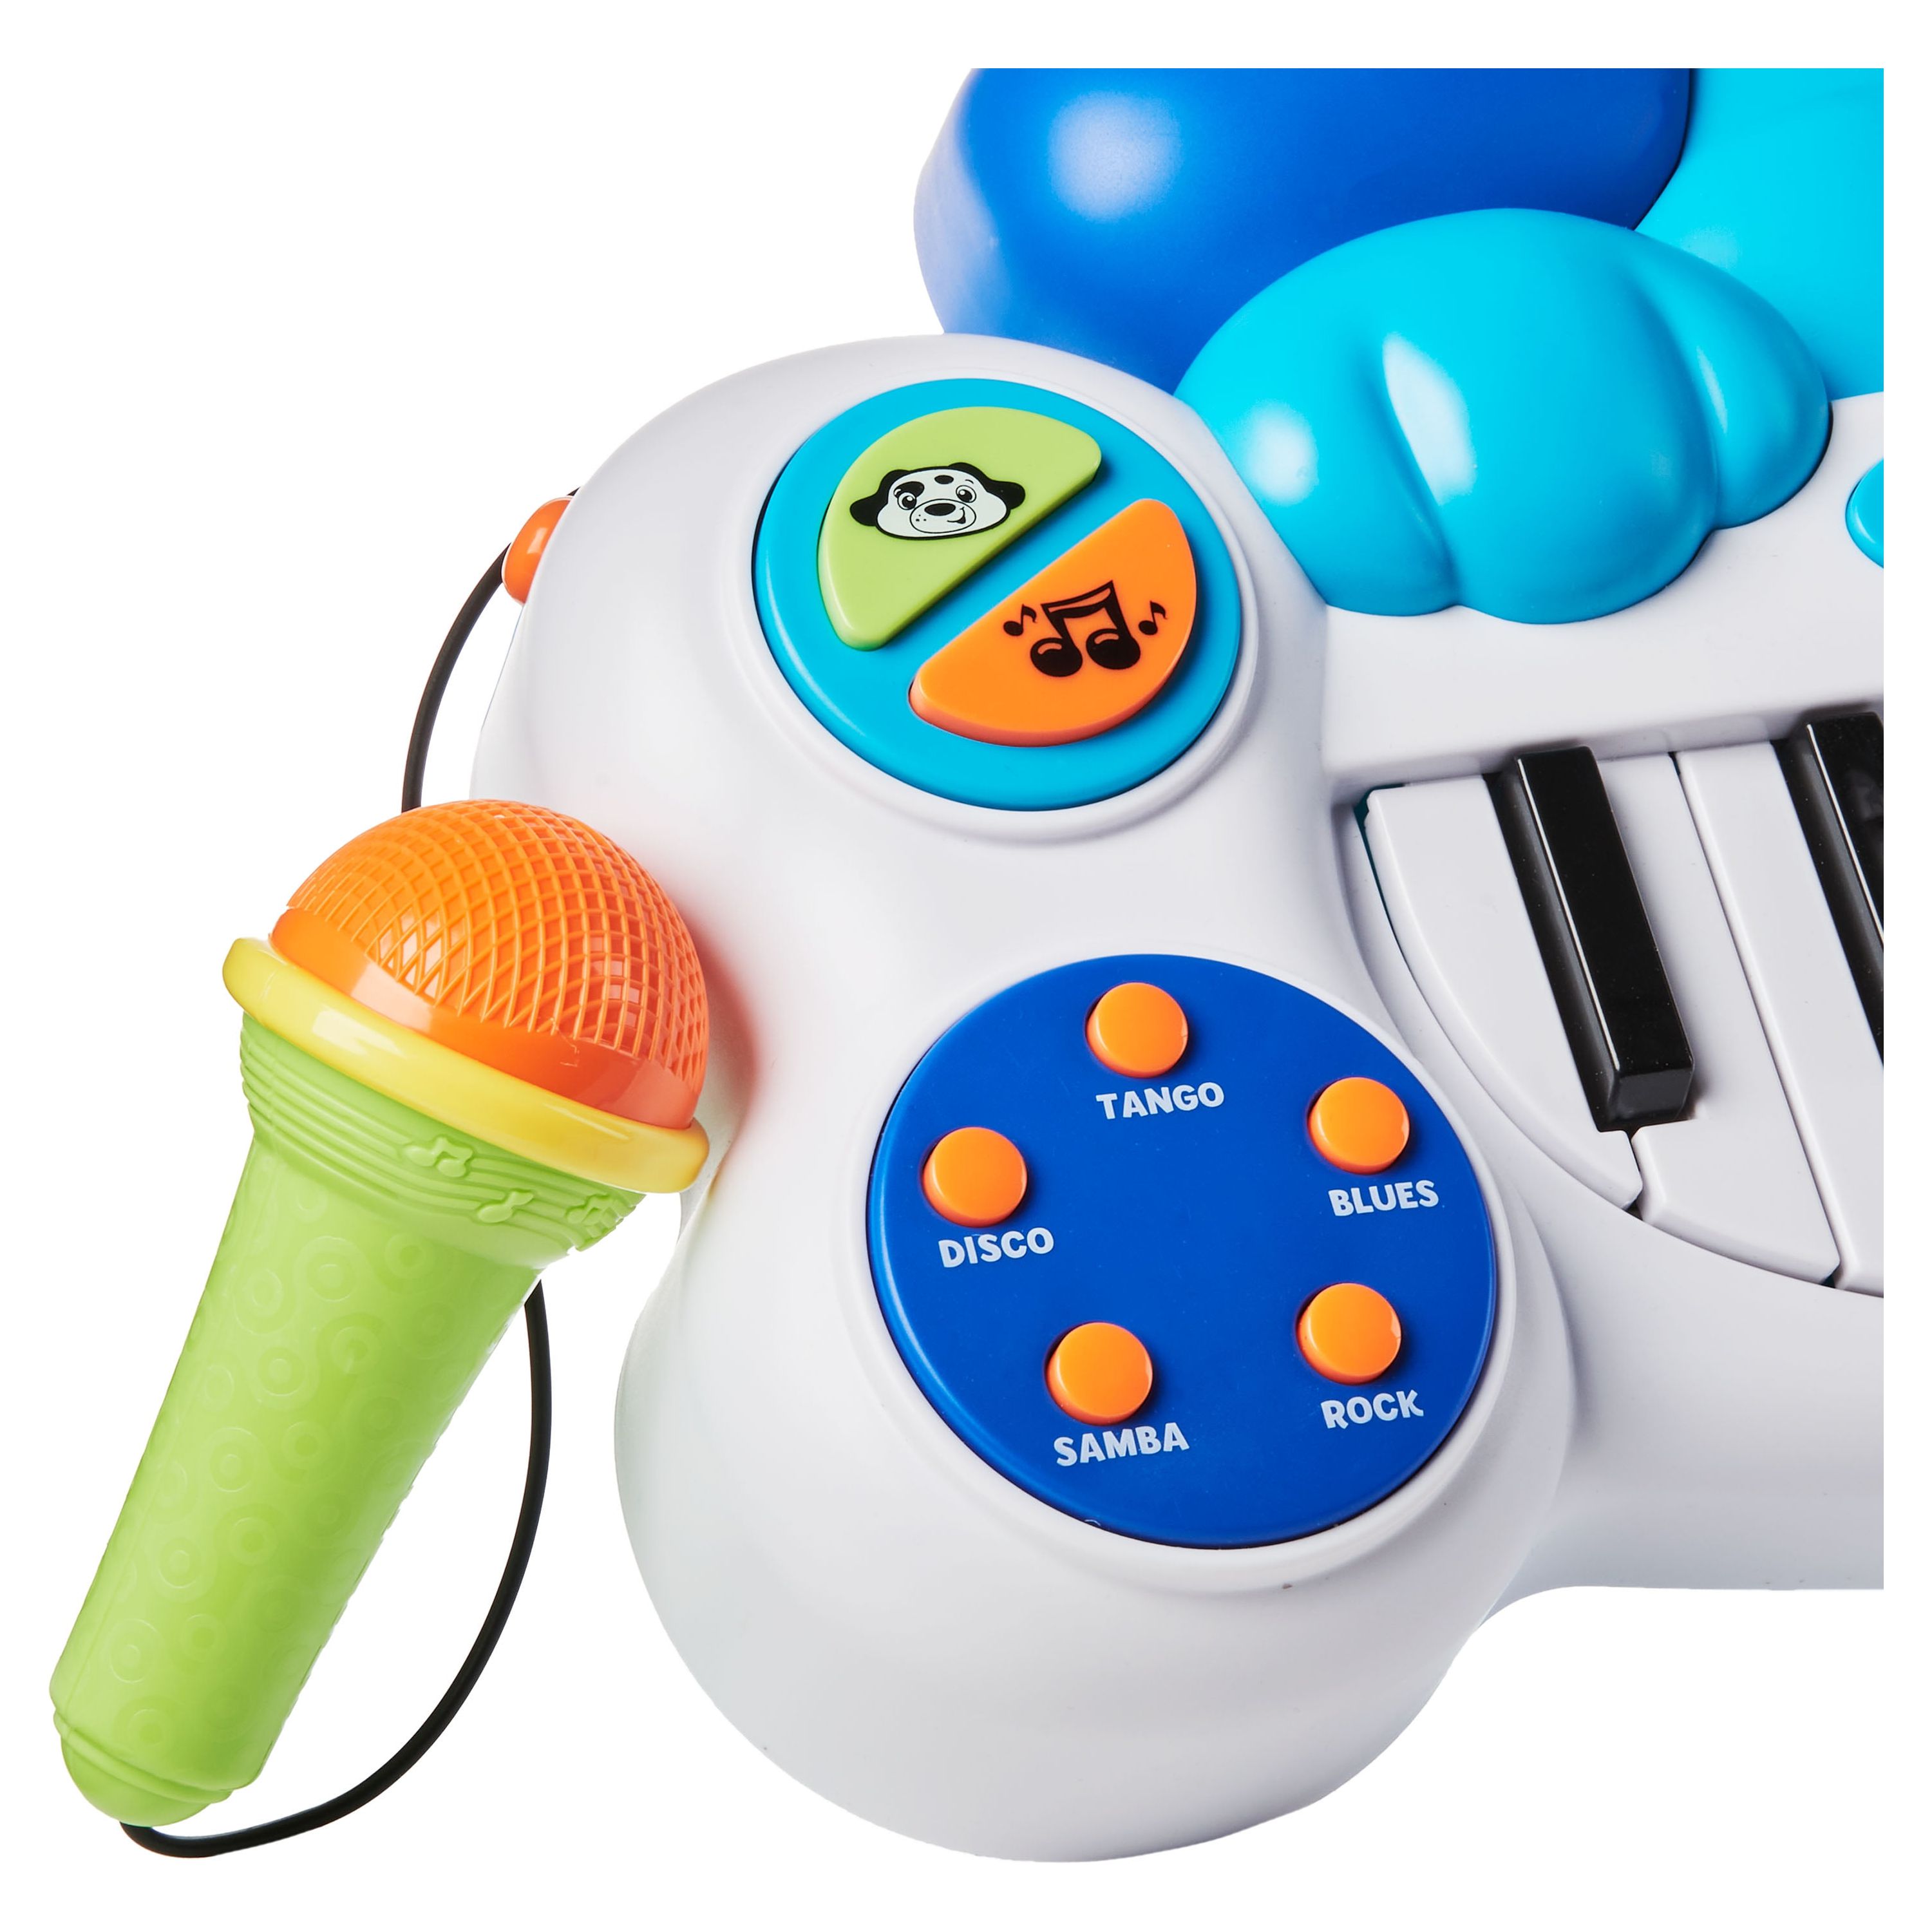 Spark Create Imagine Animal Keyboard, Toy Musical Instrument: Puppy Piano, 24 Month+, Child - image 5 of 6